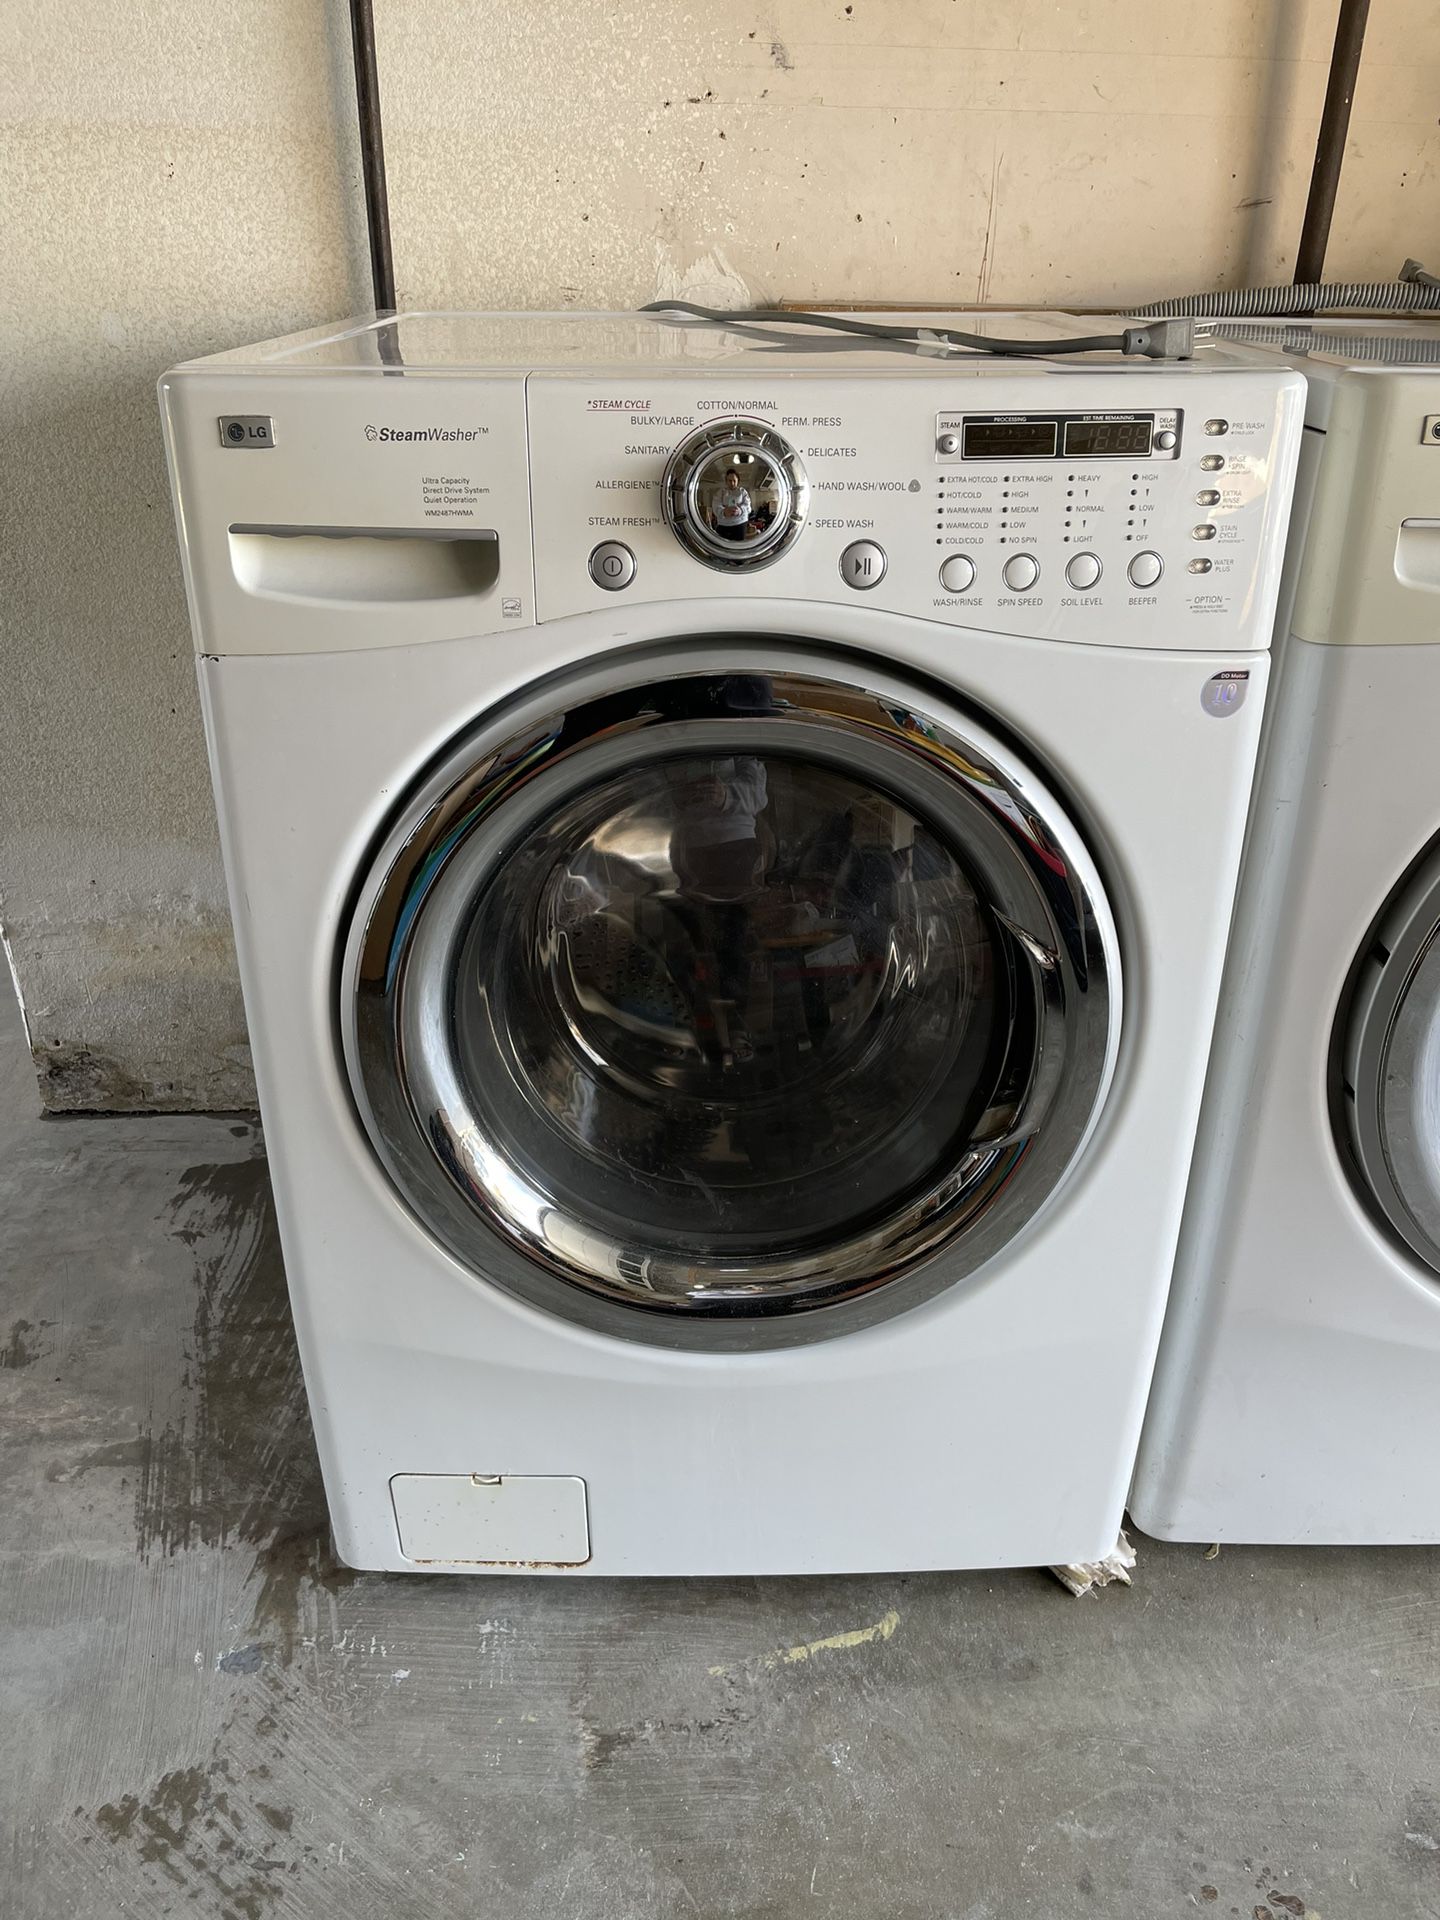 LG washer and dryer